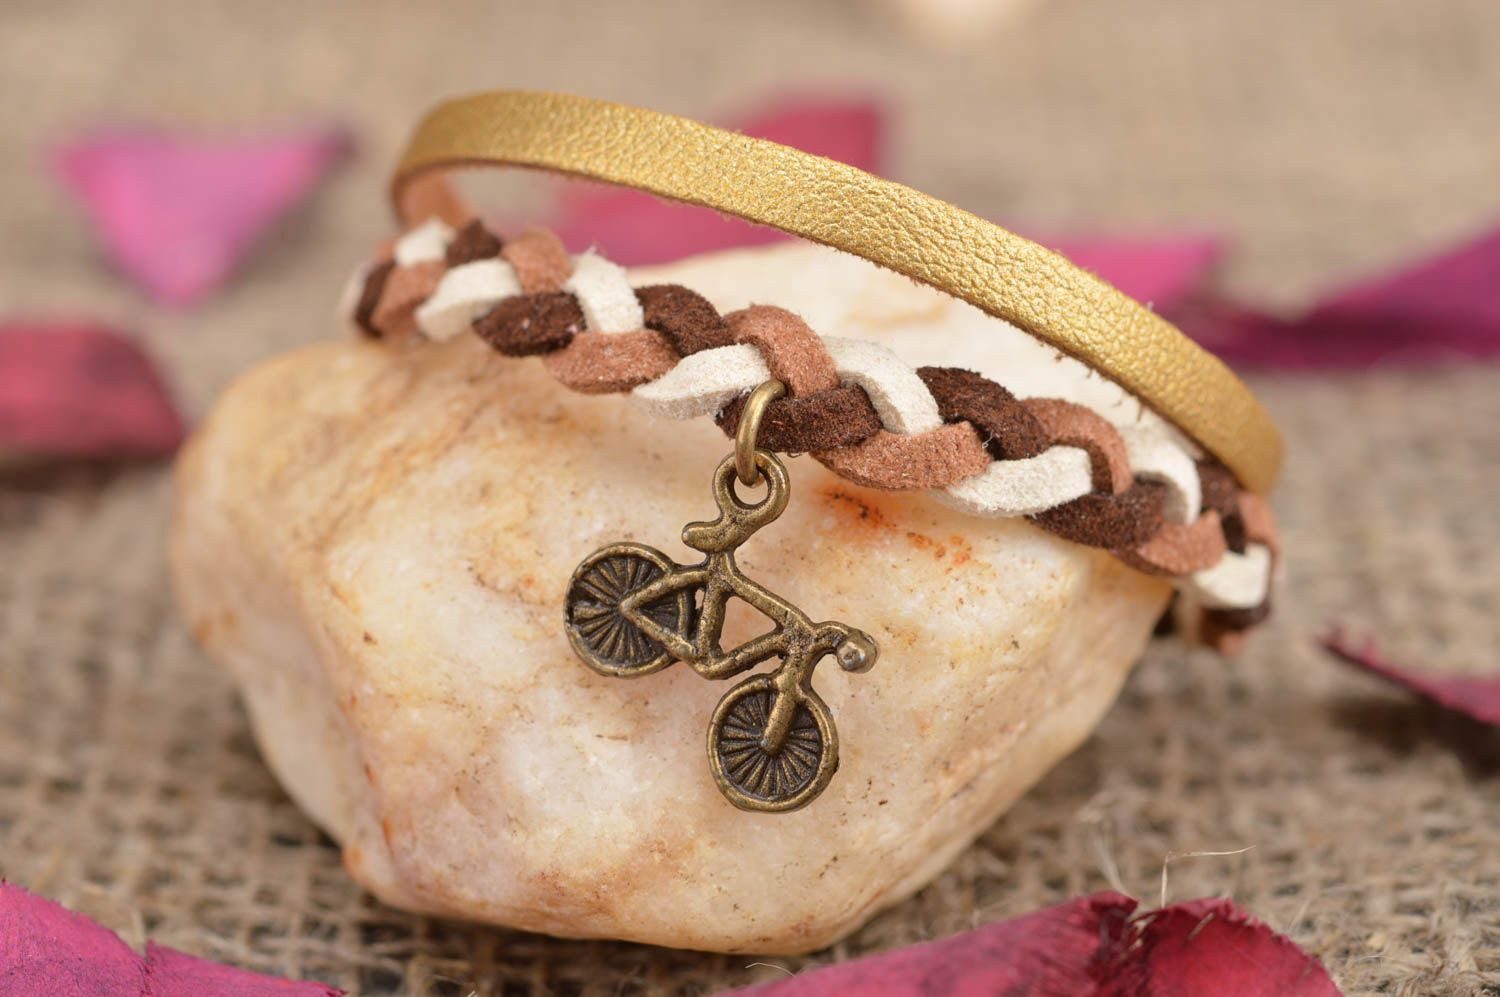 Handmade leather wrist bracelet with suede cord and metal charm Bicycle photo 1